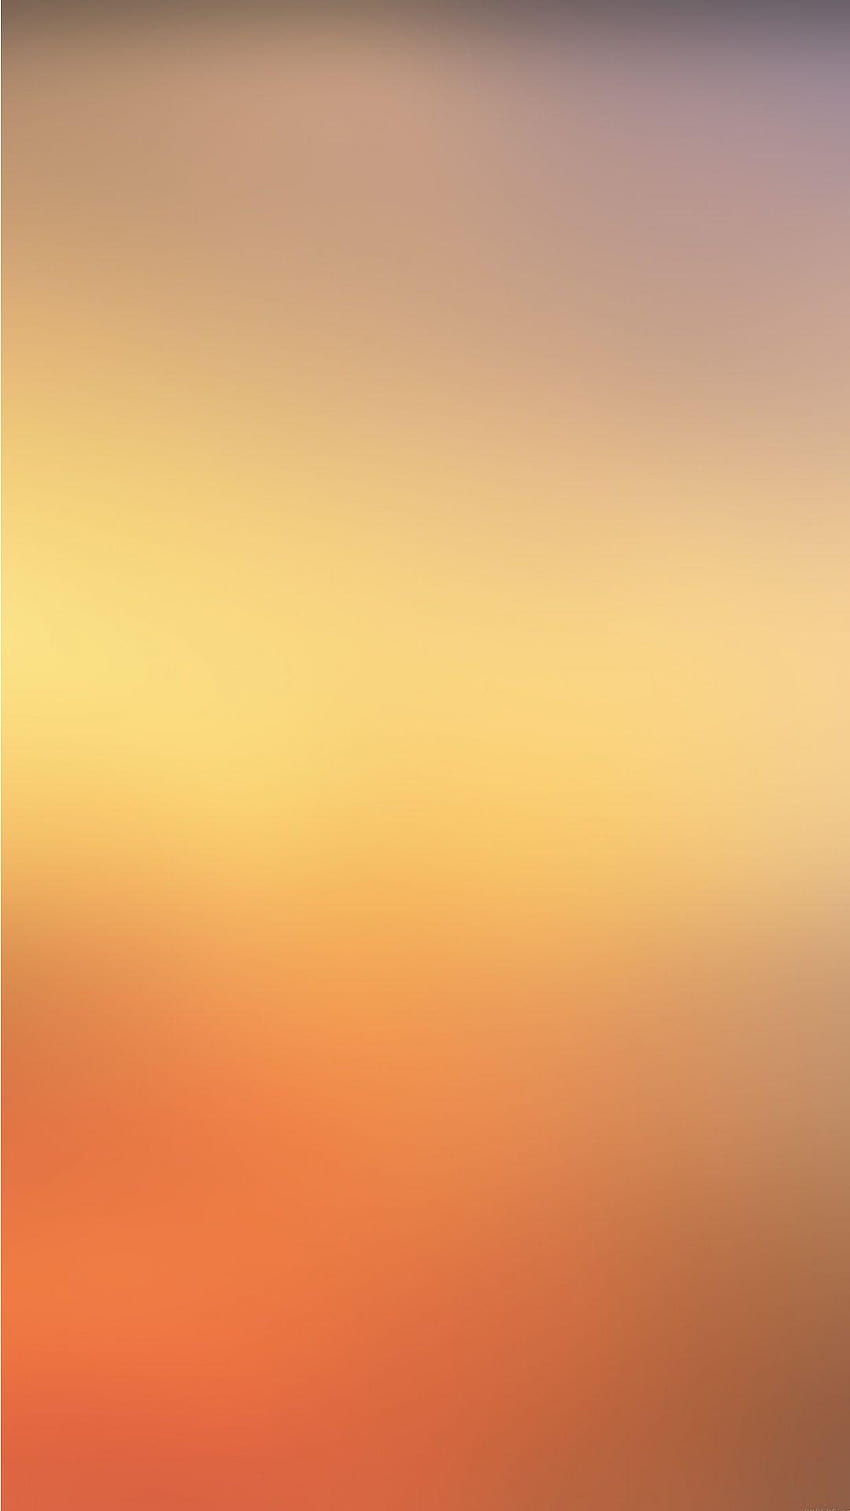 Sunset Fire Gradient. Tap to see more Blurred Gradient & Lights, gradient sunset HD phone wallpaper